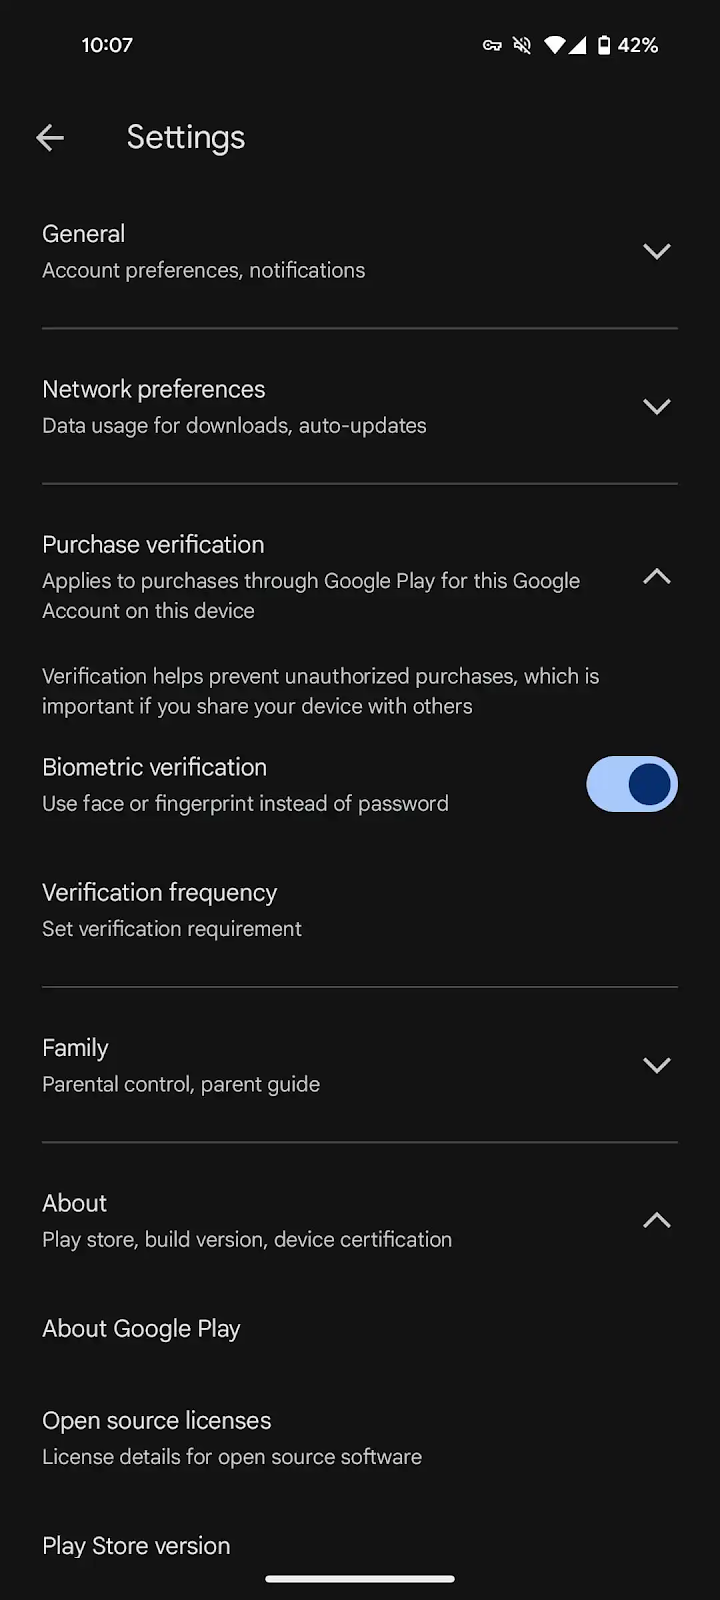 How to activate biometric verification with your fingerprint or face in the Google Play Store and what is the importance of this for Android phones